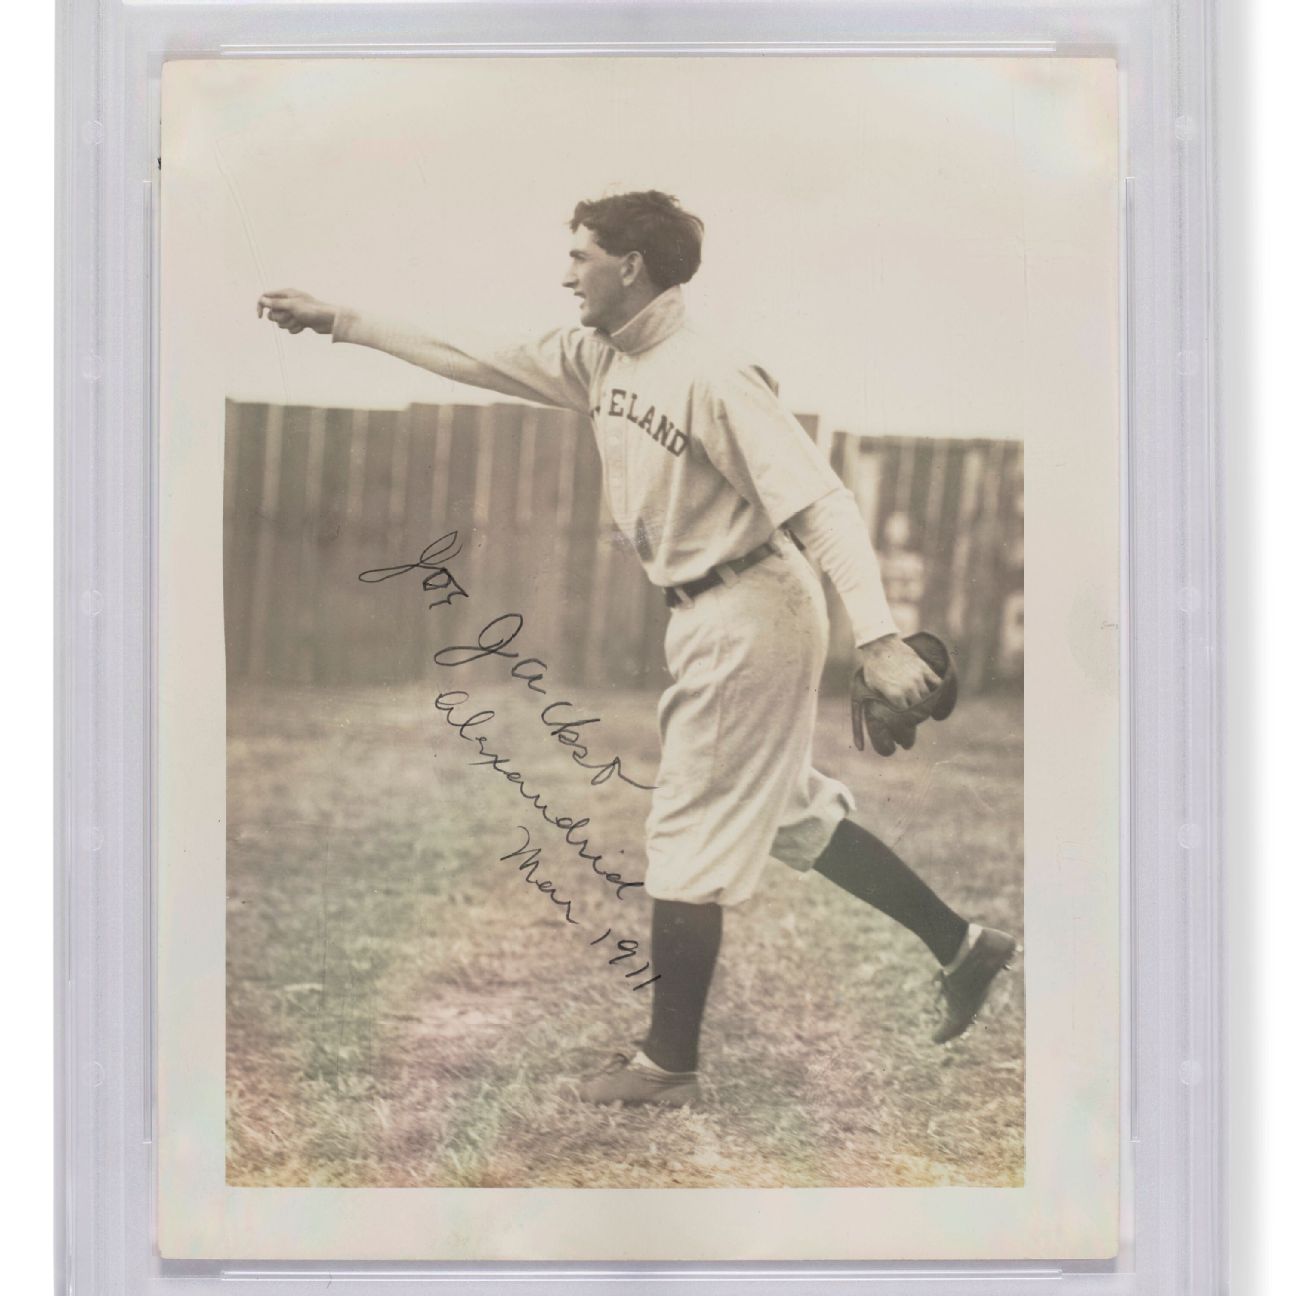 Autographed 'Shoeless' Joe Jackson photograph from 1911 sells for